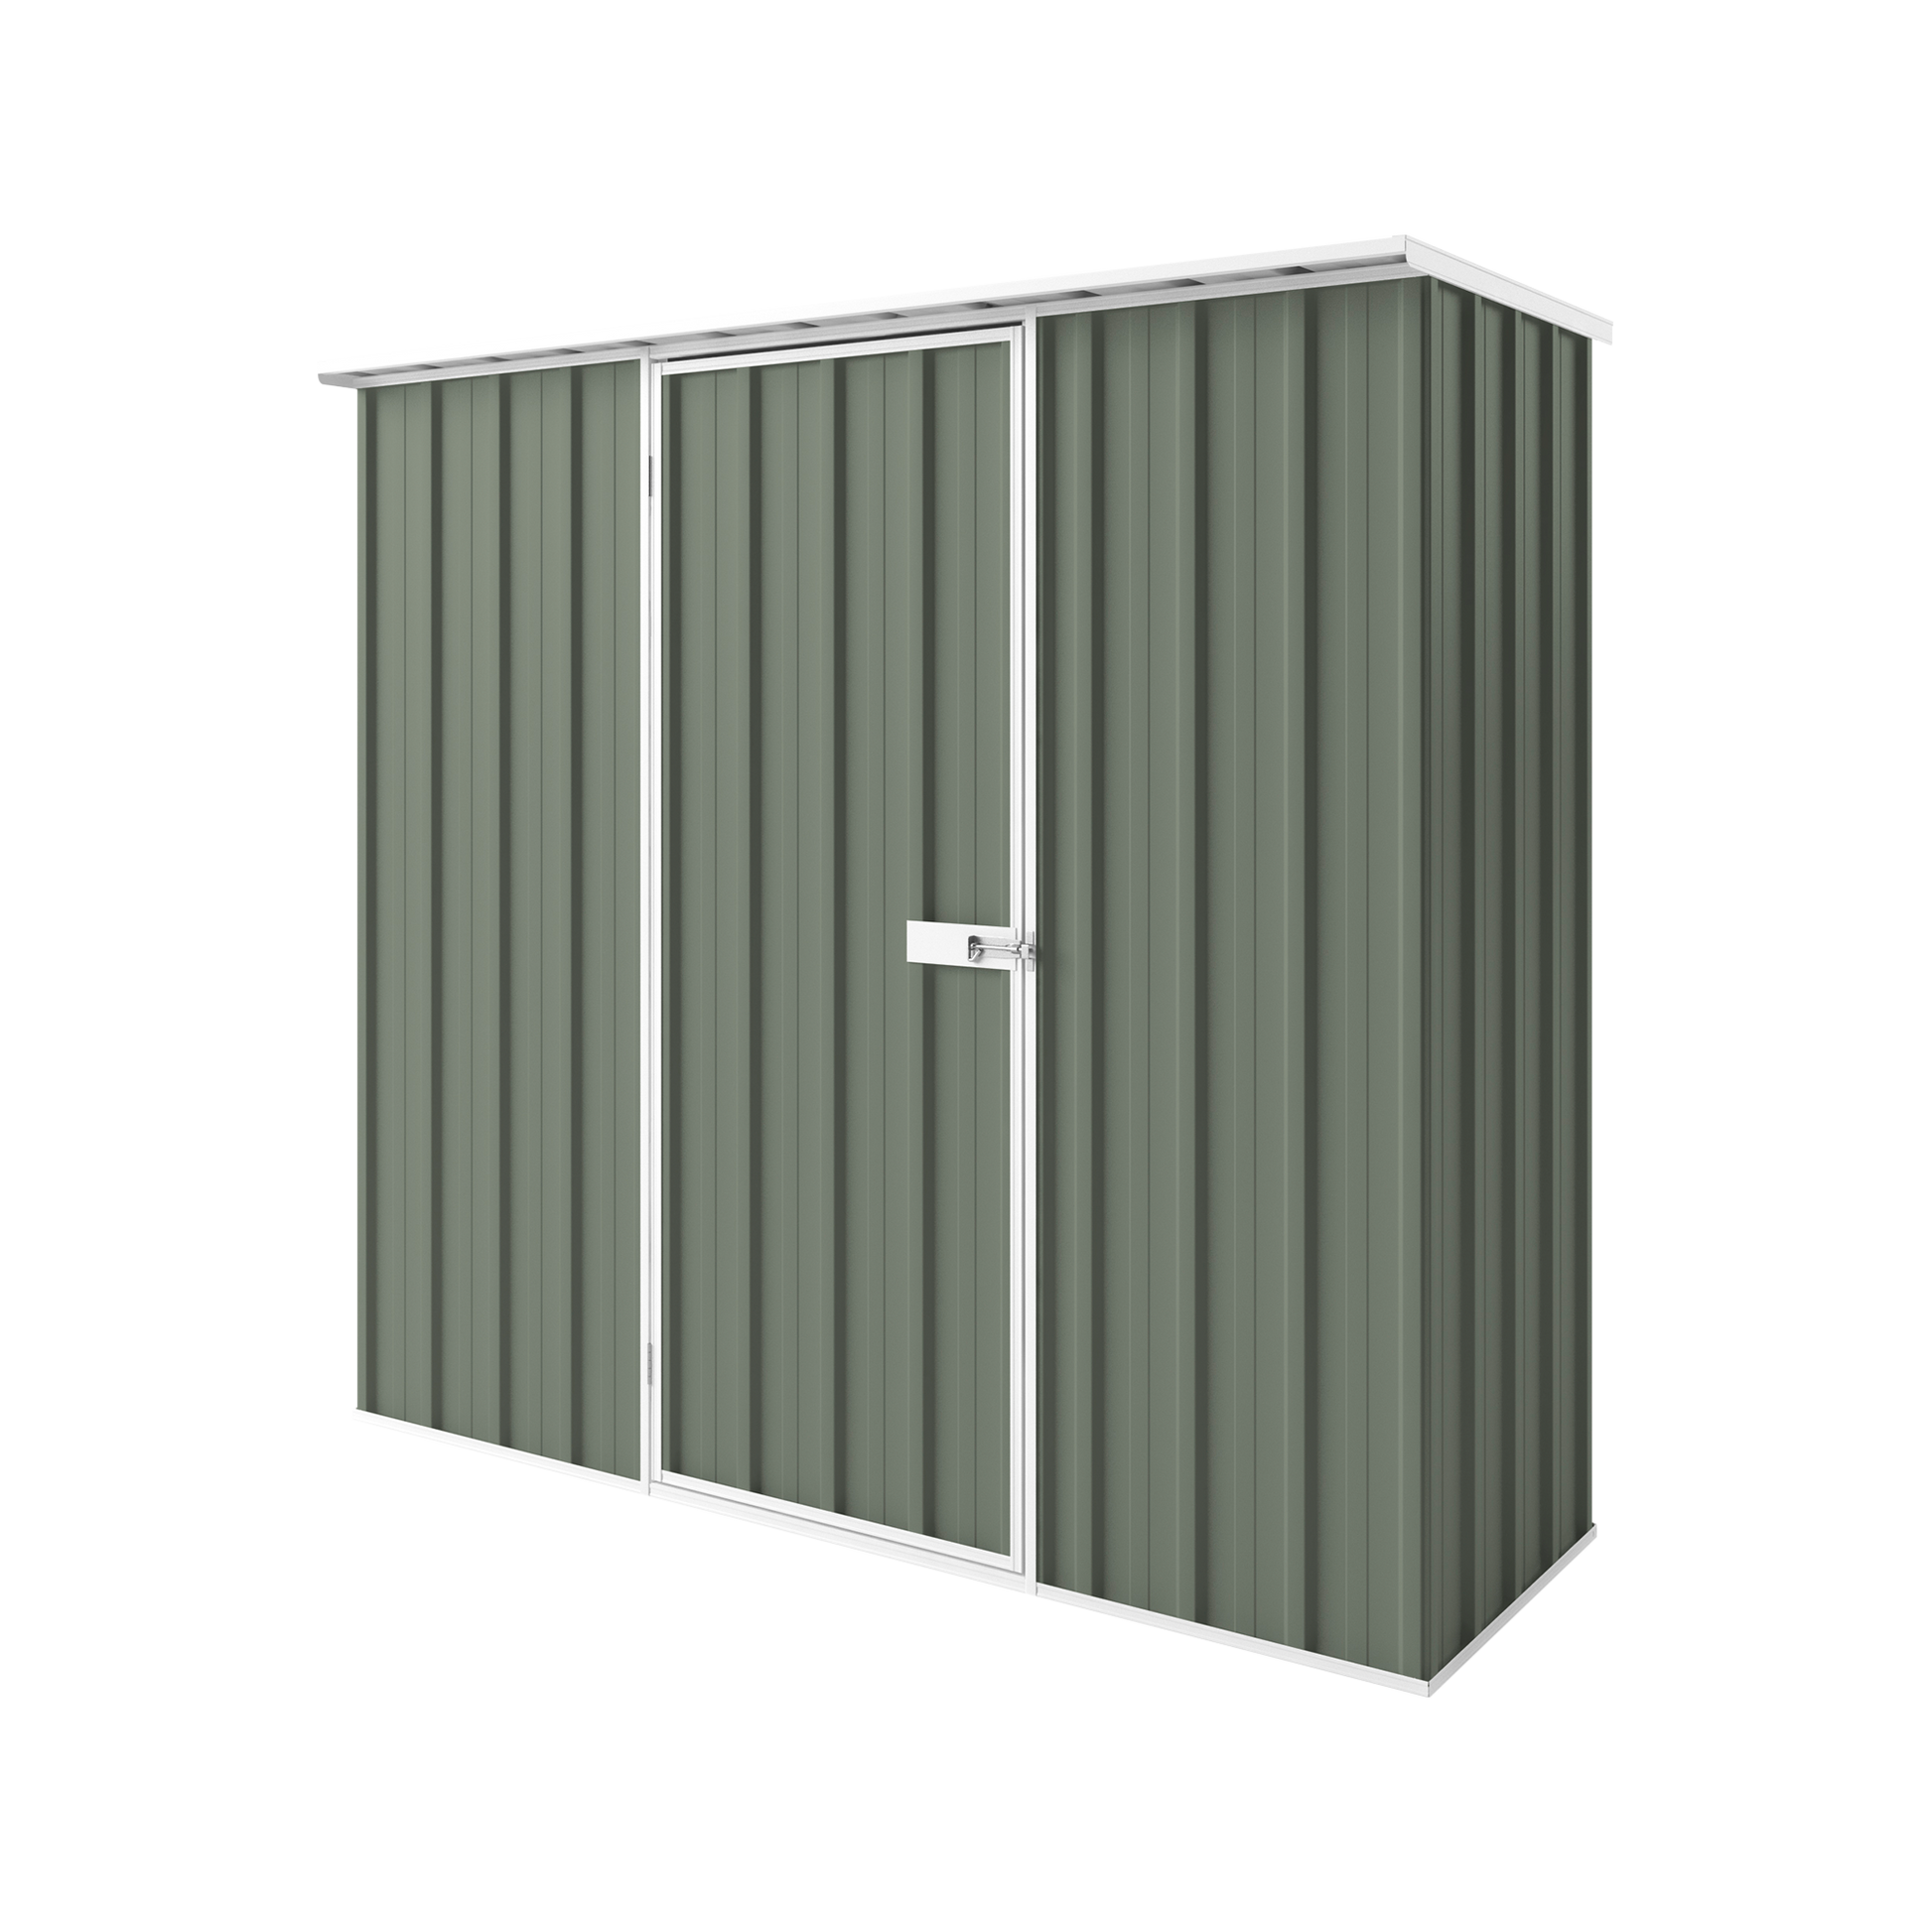 2.25m x 0.78m Flat Roof Garden Shed - EasyShed